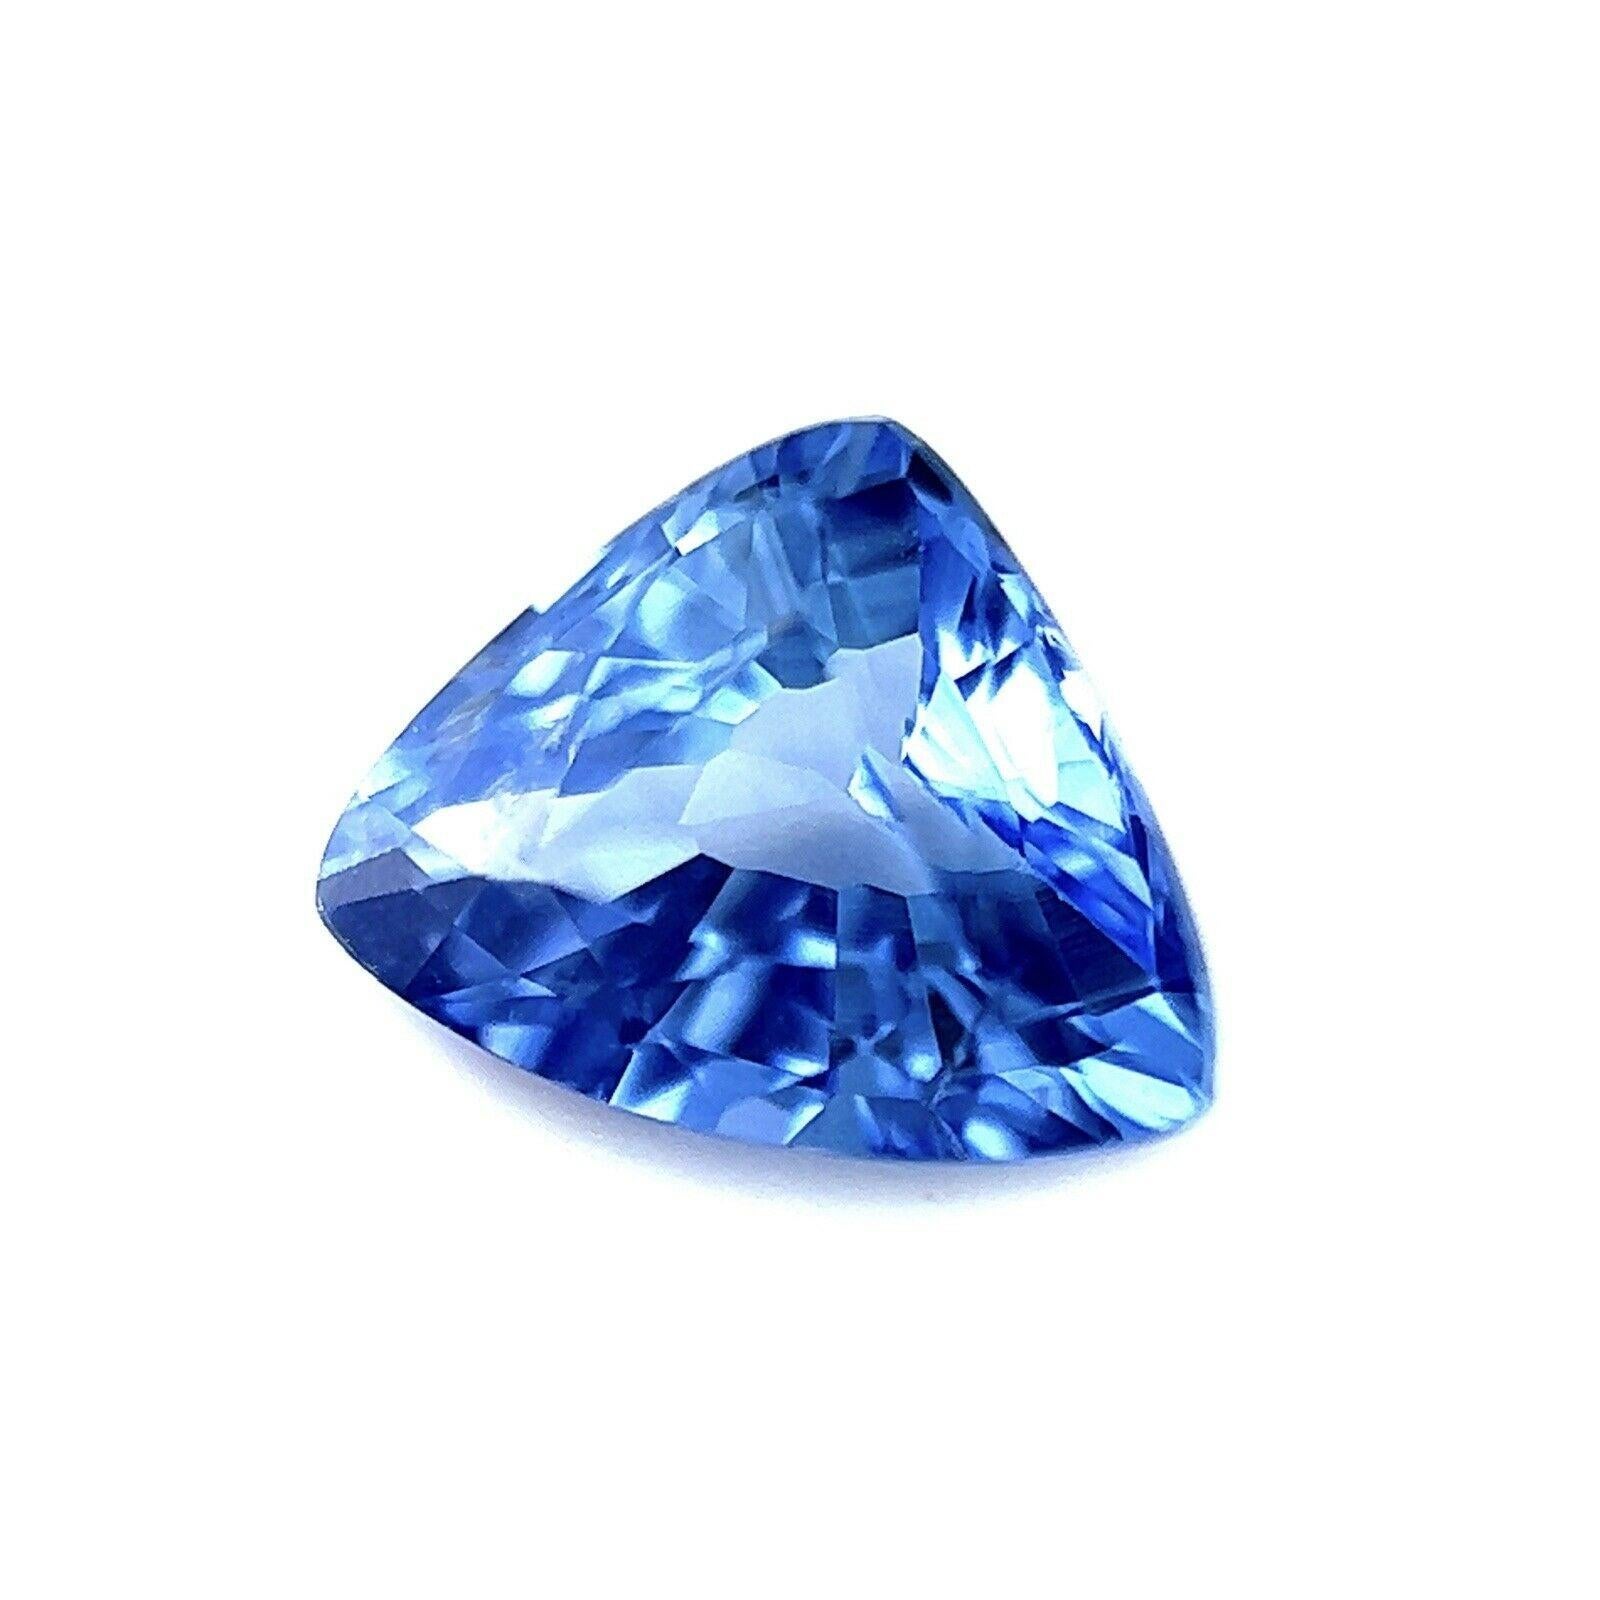 Vivid Ceylon Cornflower Blue Sapphire 0.79ct Trillion Triangle Cut Gem 6.4x5mm

Natural Ceylon Conflower Blue Trillion Sapphire.
0.79 Carat with a beautiful vivid cornflower blue colour and very good clarity, a clean stone with only some small